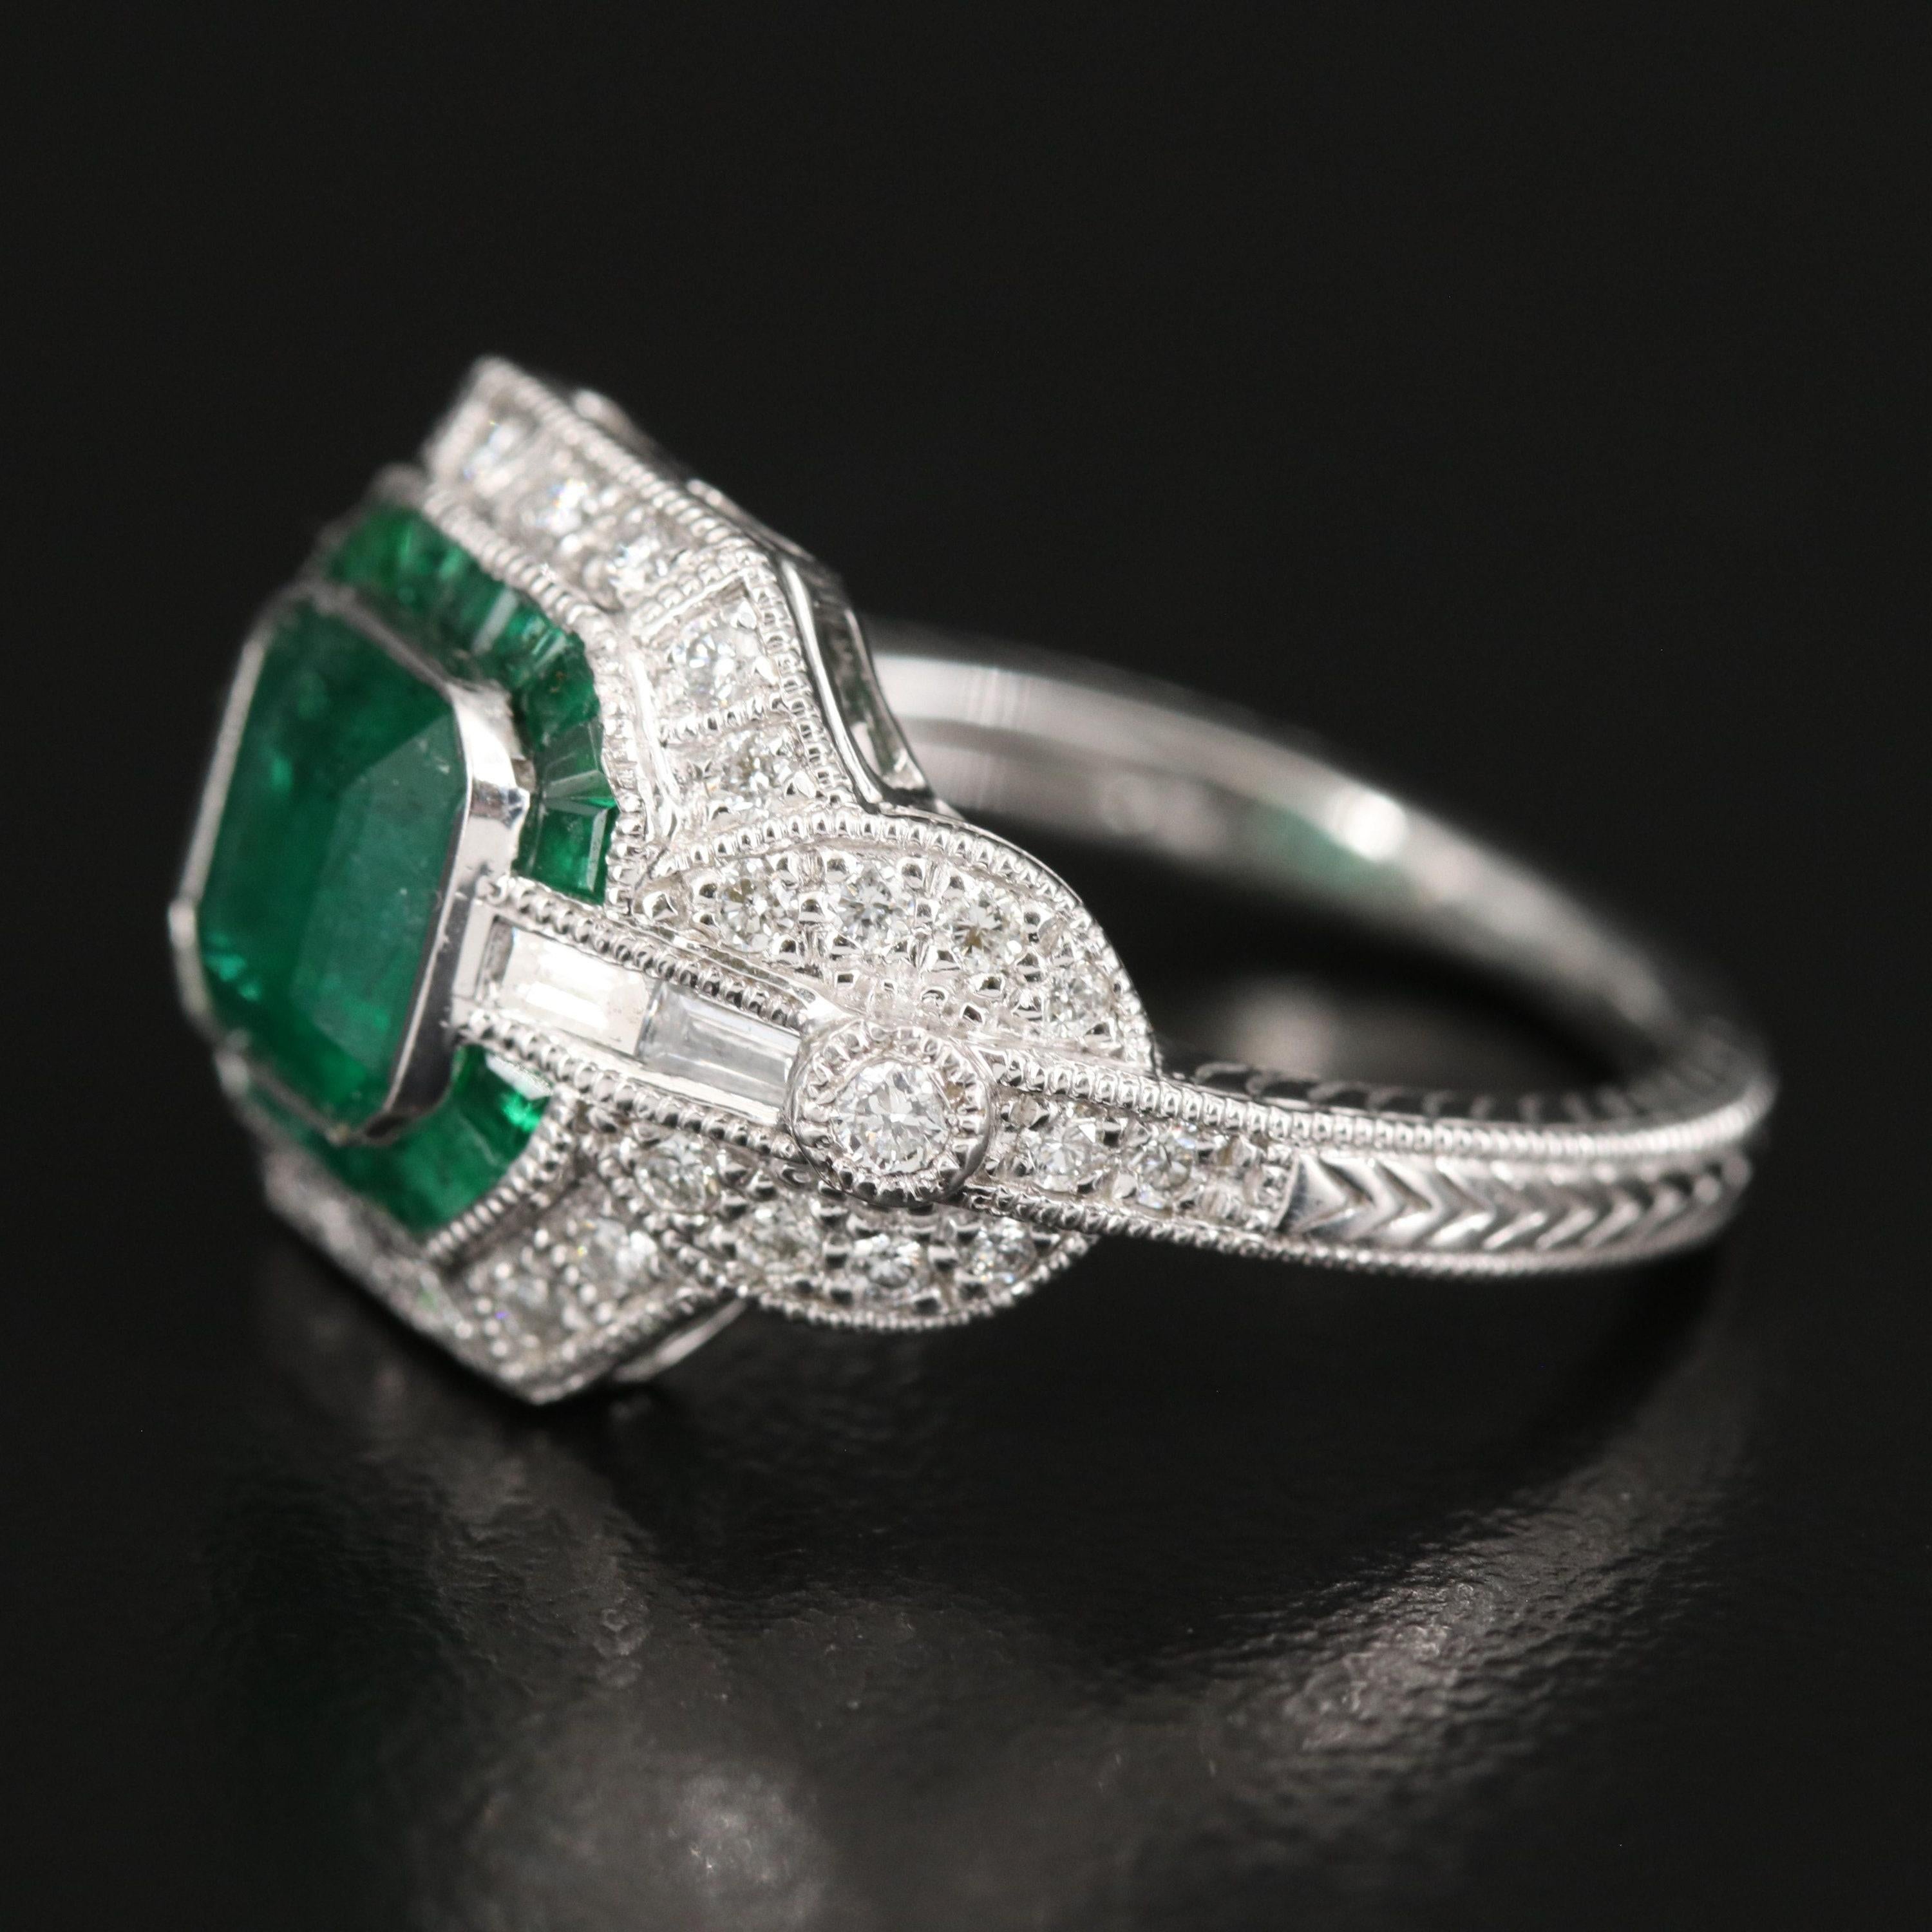 For Sale:  Vintage 4.2 Carat Emerald Diamond Engagement Ring, Cluster Diamond Cocktail Ring 3